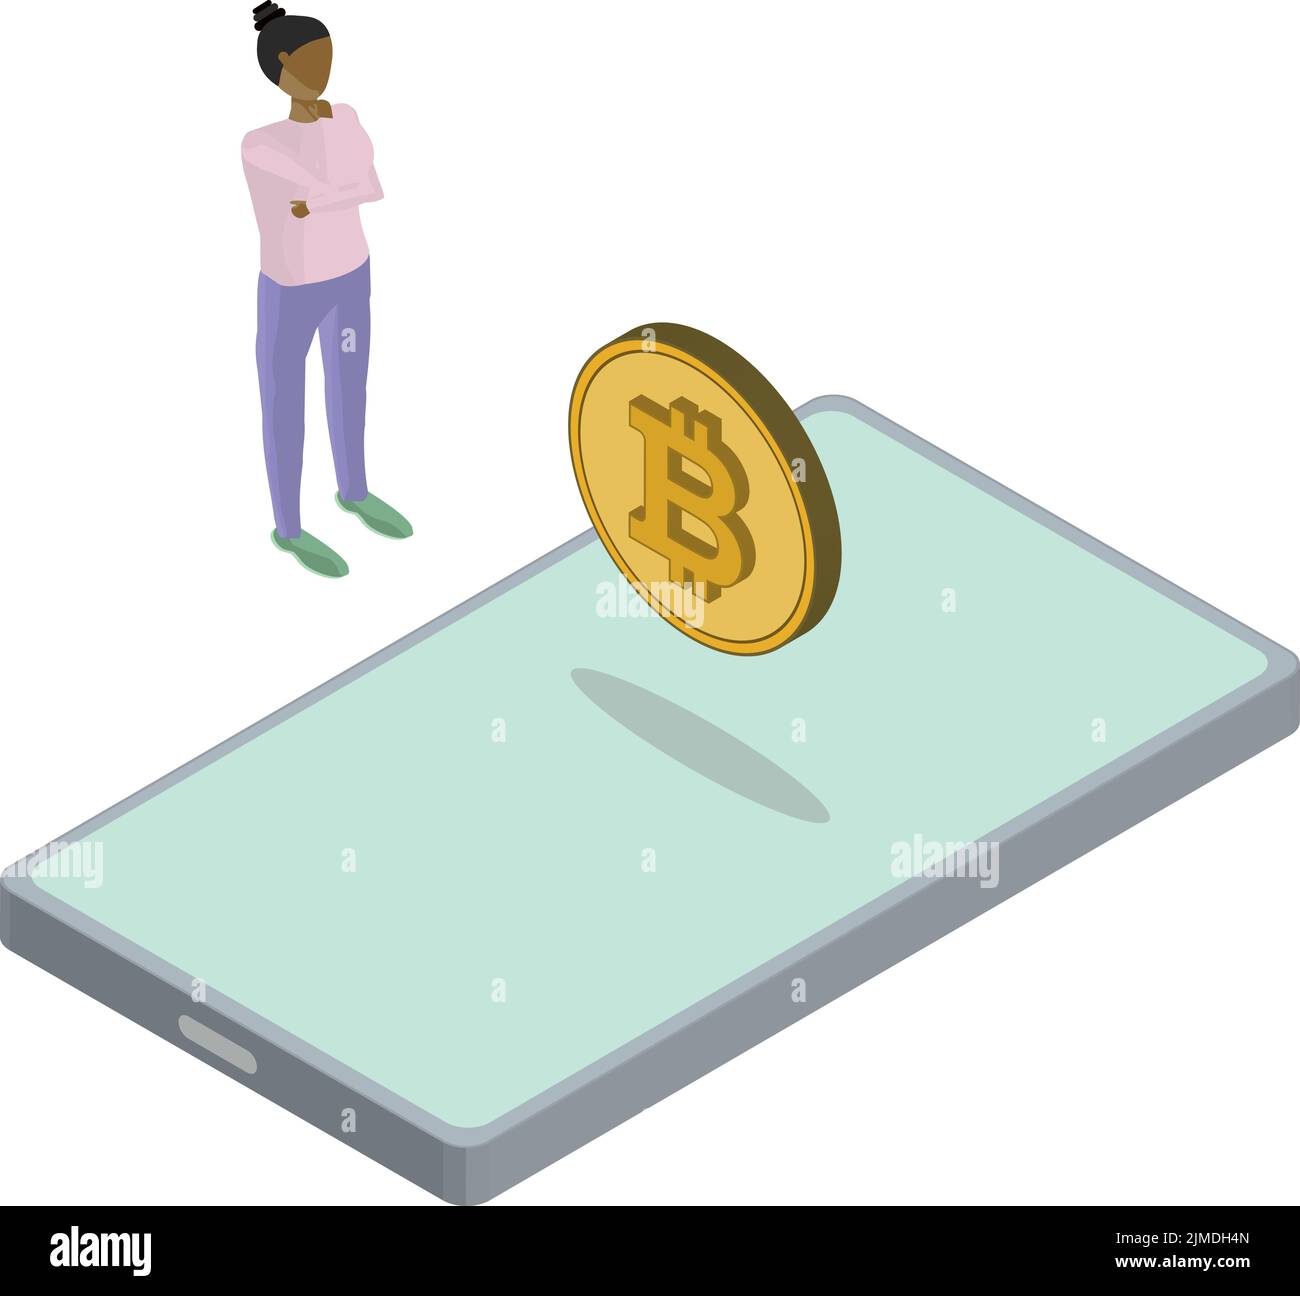 Isometric view of Phone Bitcoin Floating Woman Thinking Stock Vector